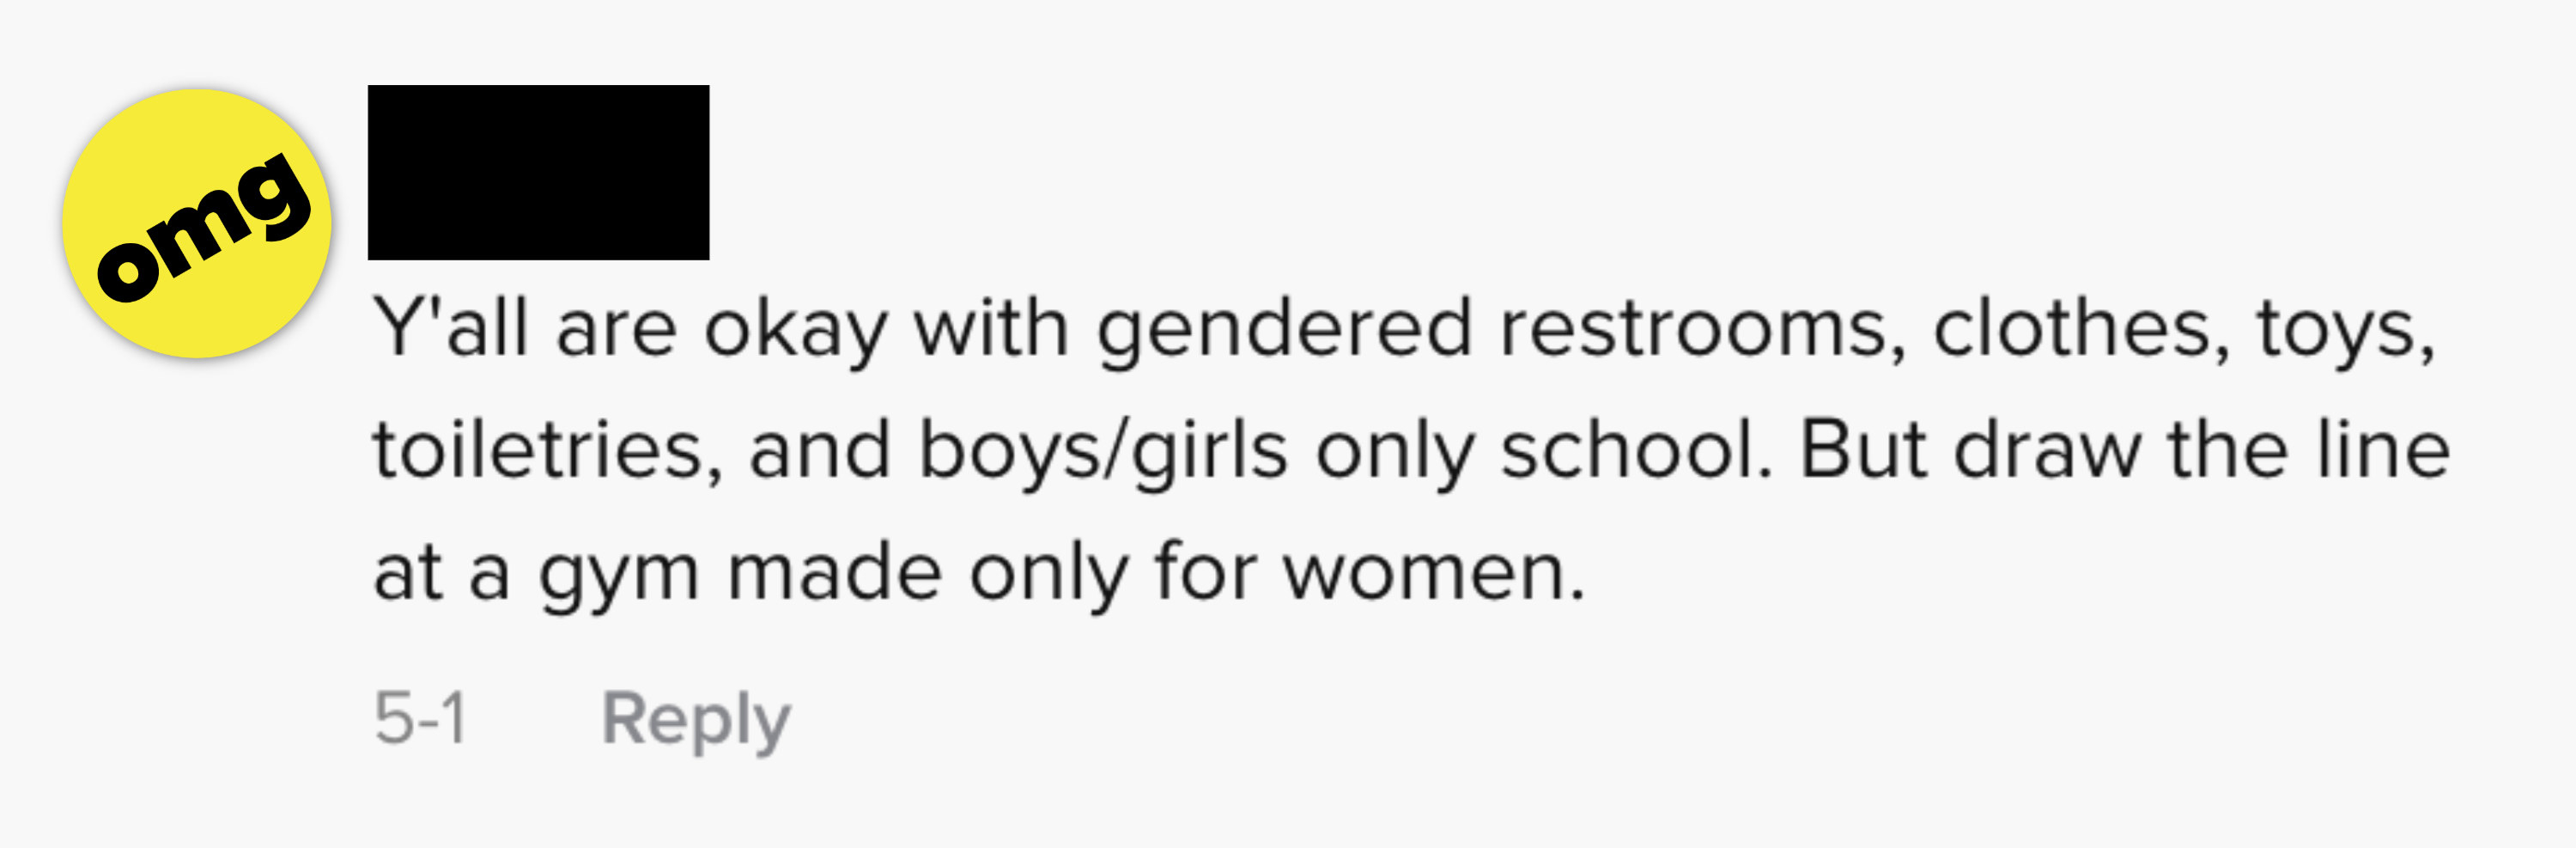 y&#x27;all are ok with gendered restrooms, clothes, toys, toiletries, and boys/girls on school. but draw the line at a gym made only for women